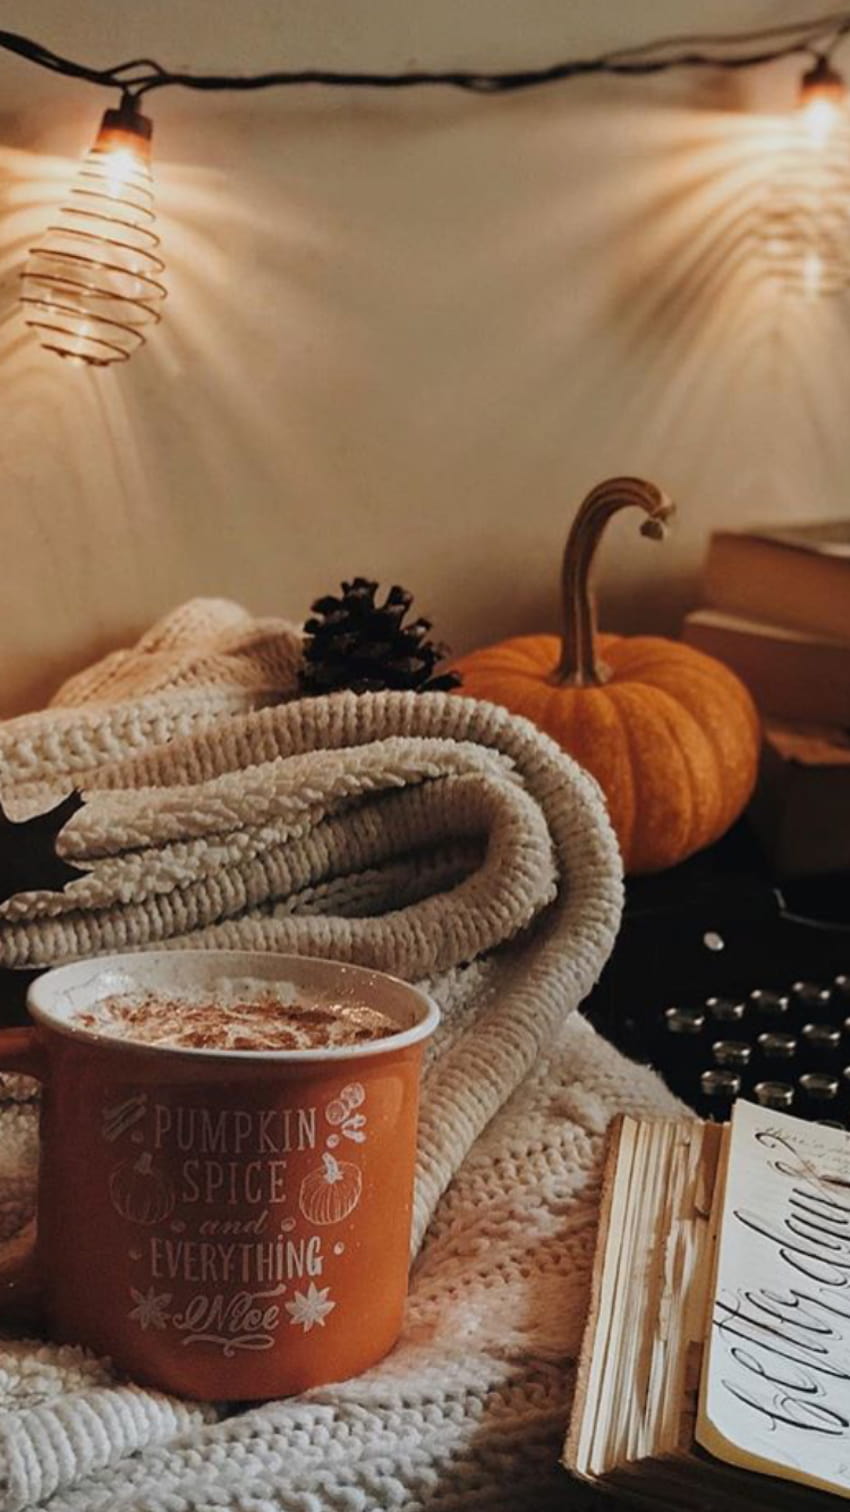 A cup of pumpkin spice latte sits on a blanket next to a book. - Fall, cozy, fall iPhone